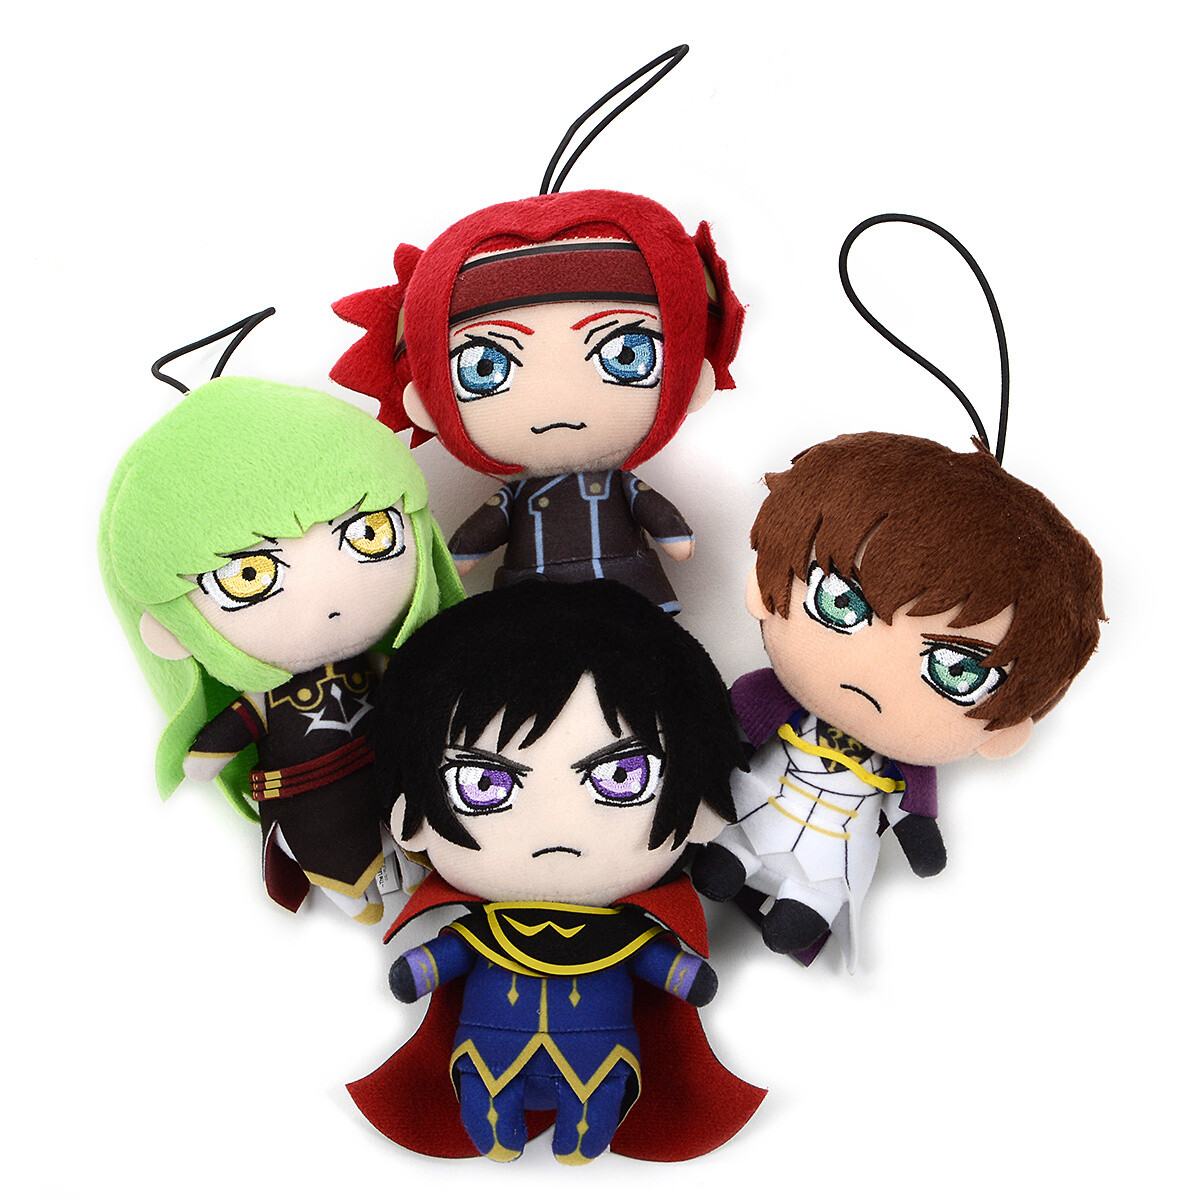 Code Geass: Lelouch of the Rebellion Plushie Lelouch Lamperouge